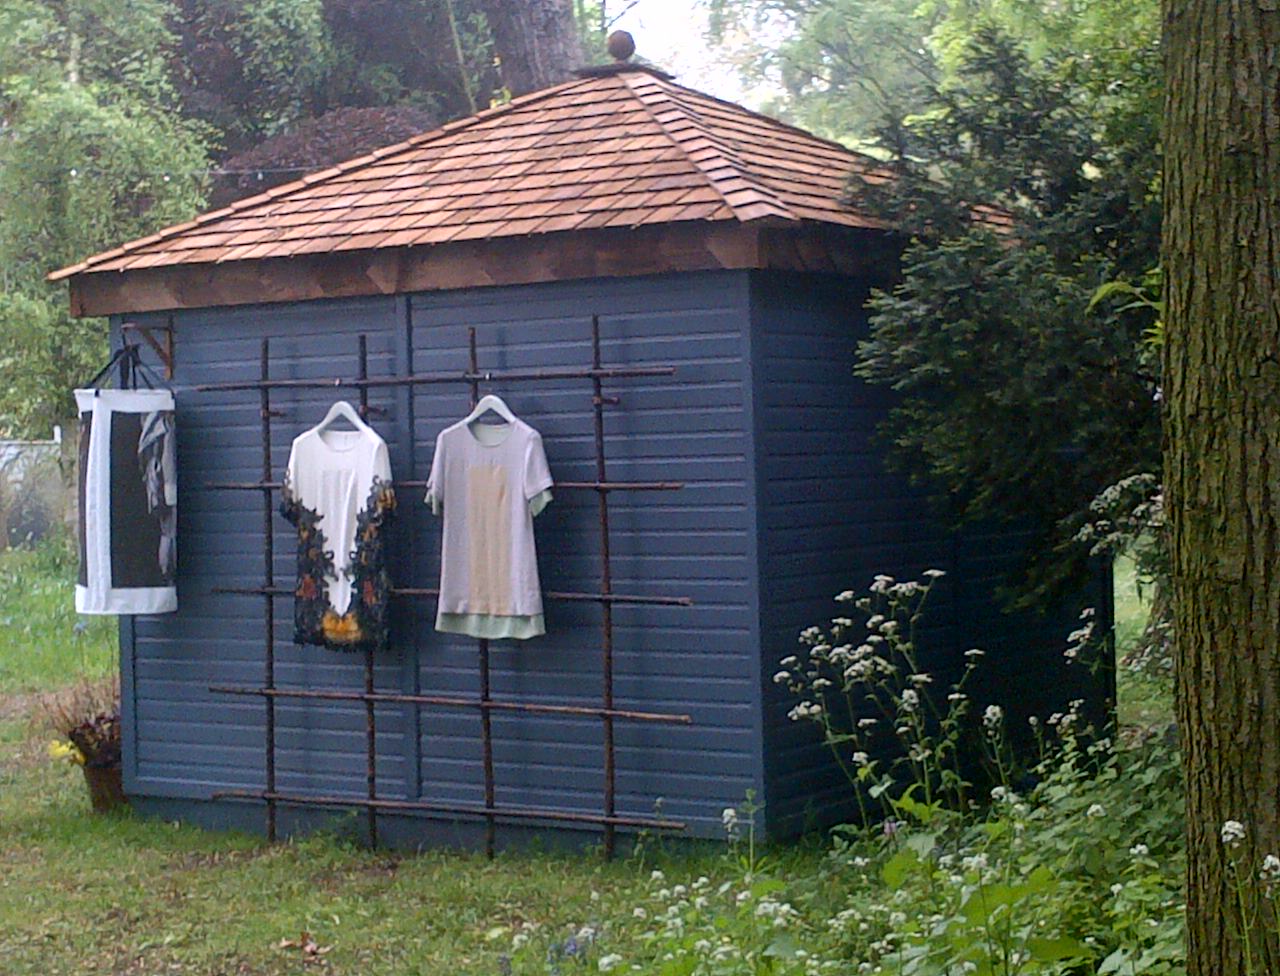 Eco-textile clothes designed by students from the LCF eco-fashion course are displayed outside the Artisan retreat.